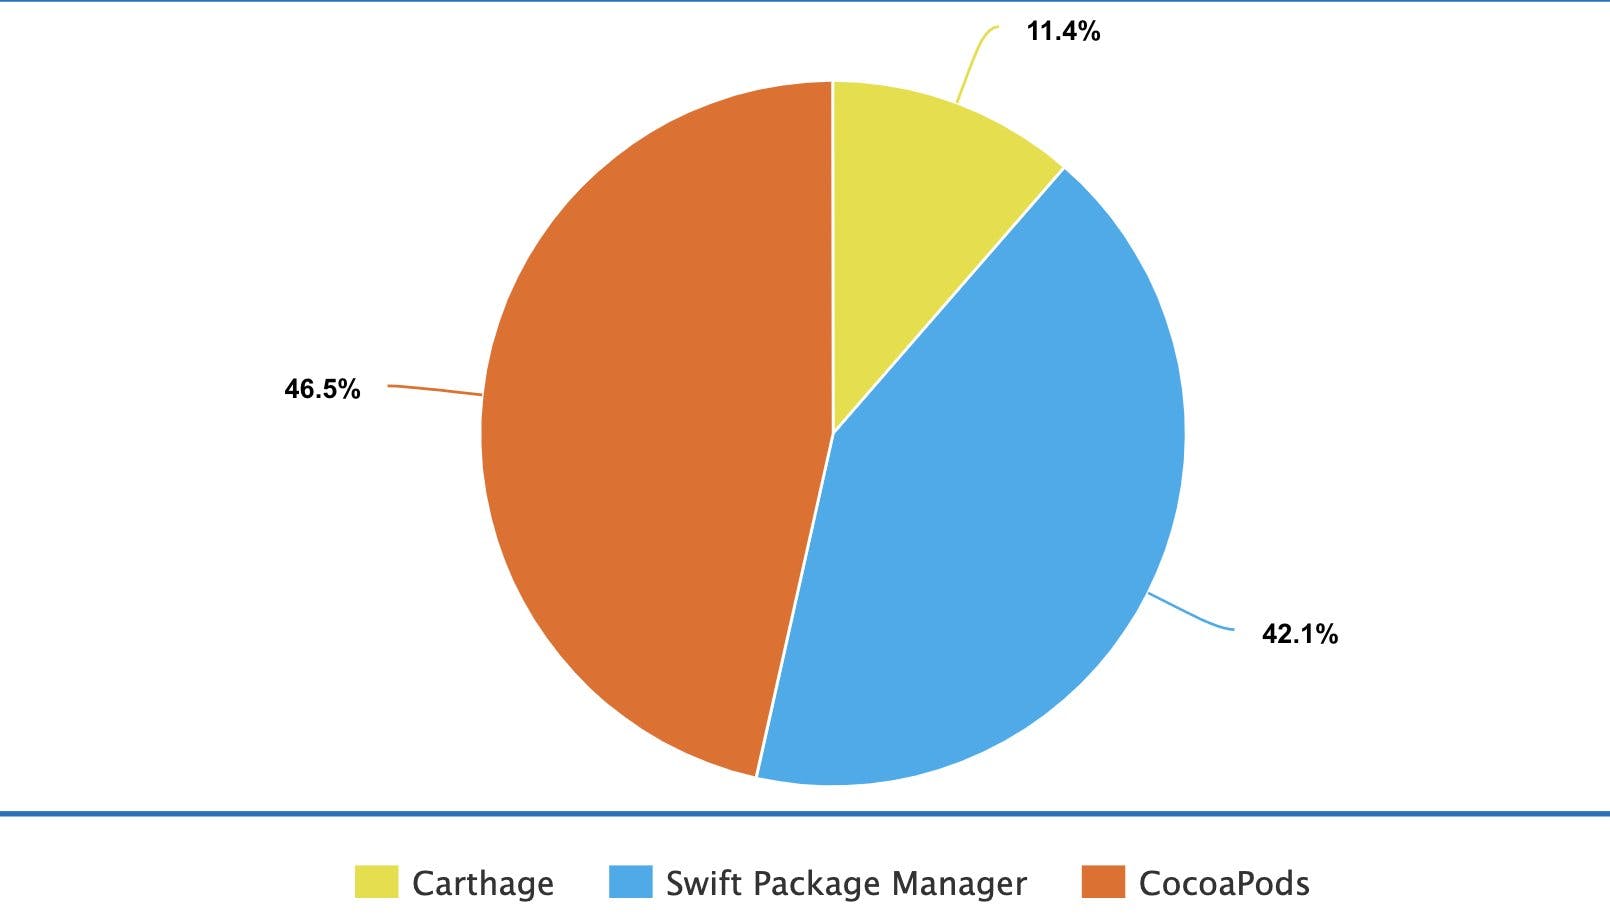 Twitter poll shows 46.5% of CocoaPods usage, 42.1% of Swift Package Manager, and 11.4% of Carthage